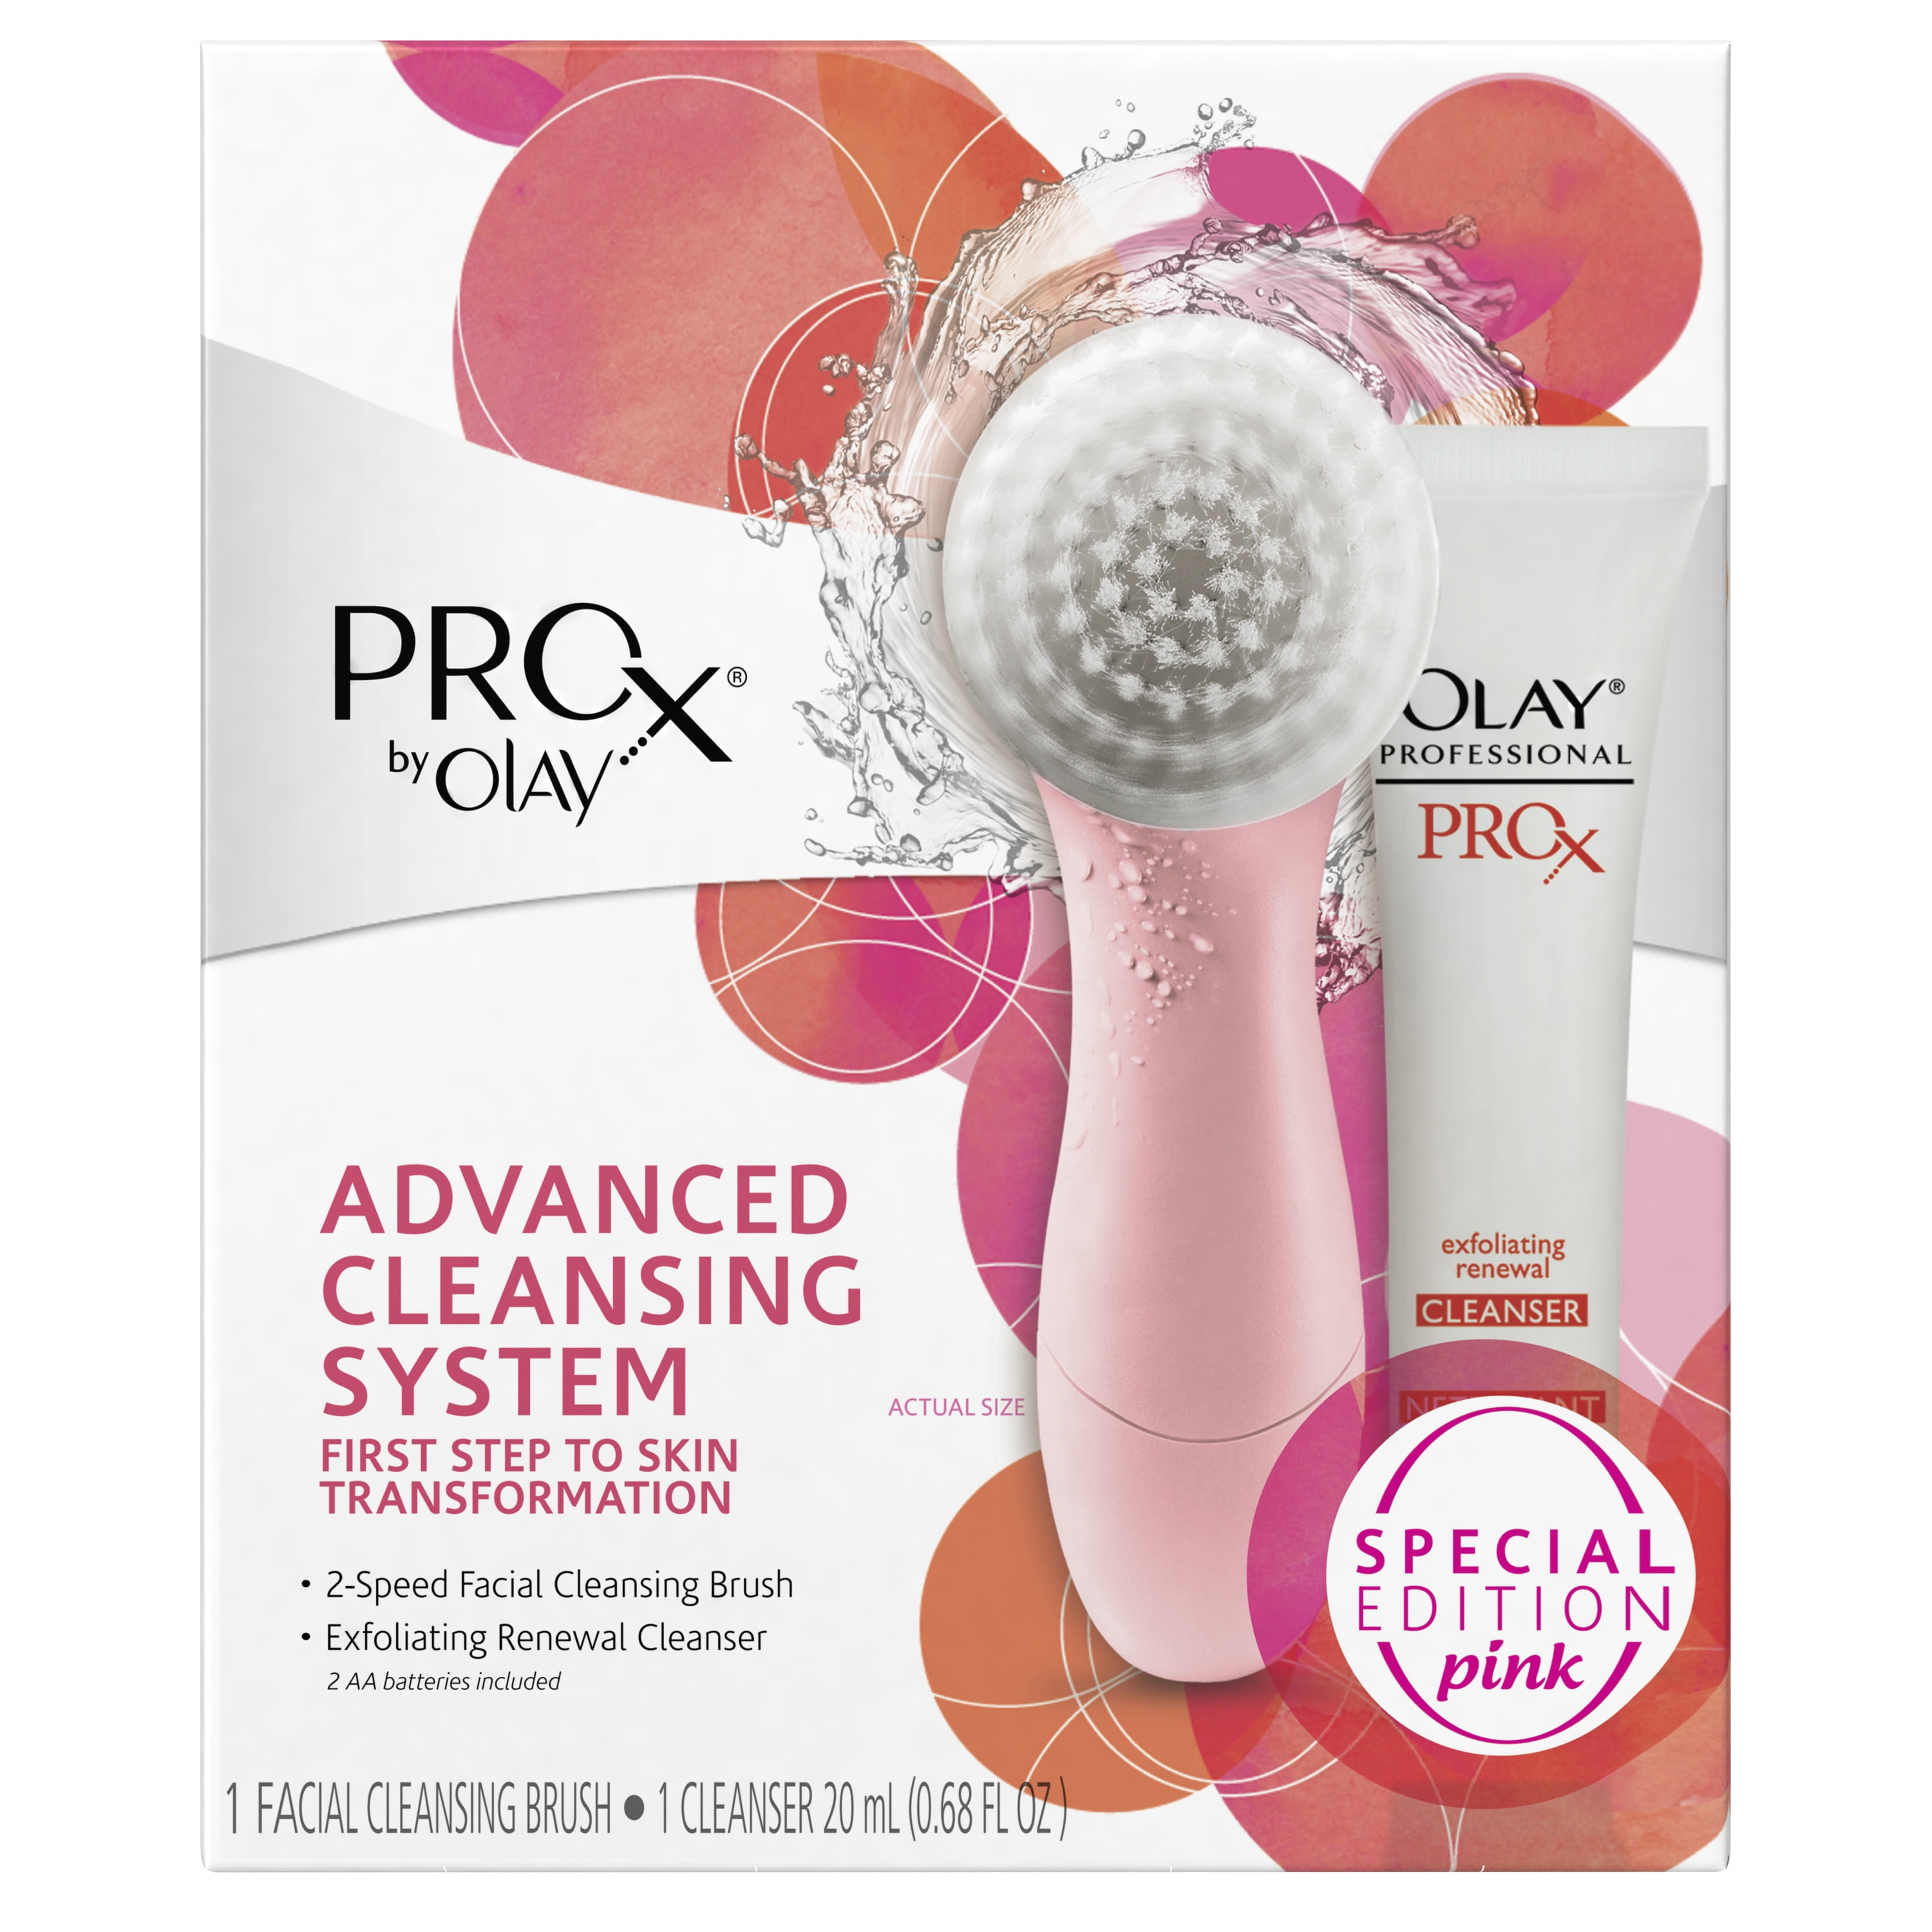 Advanced cleansing. Olay's professional Pro-x Advanced Cleansing System. Advanced сдуфтштп.